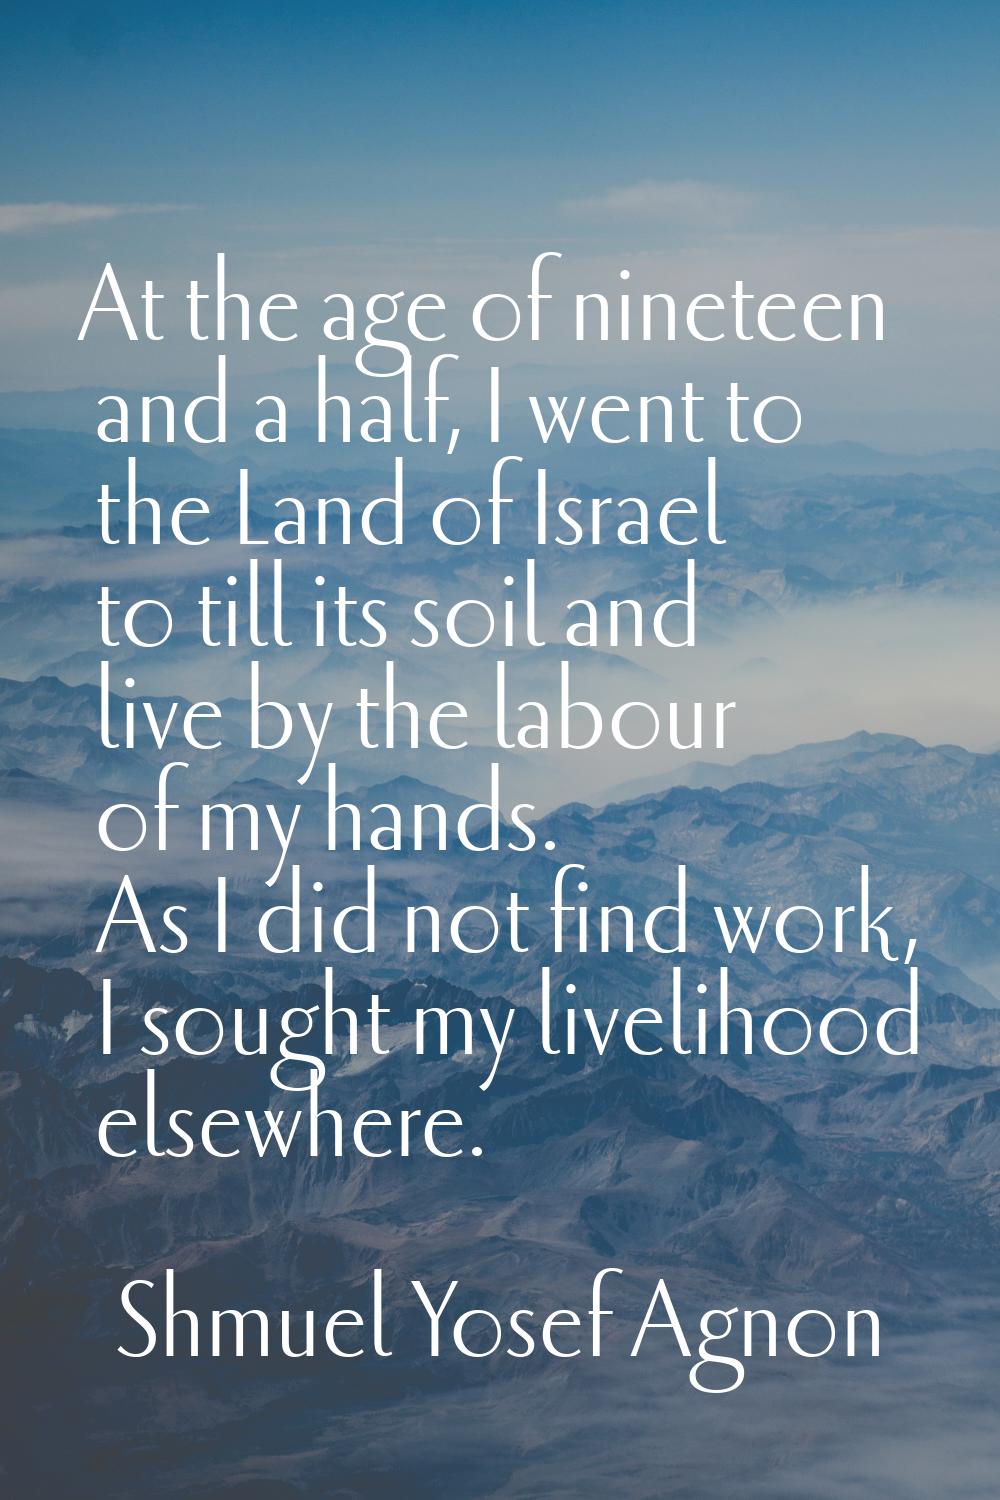 At the age of nineteen and a half, I went to the Land of Israel to till its soil and live by the la